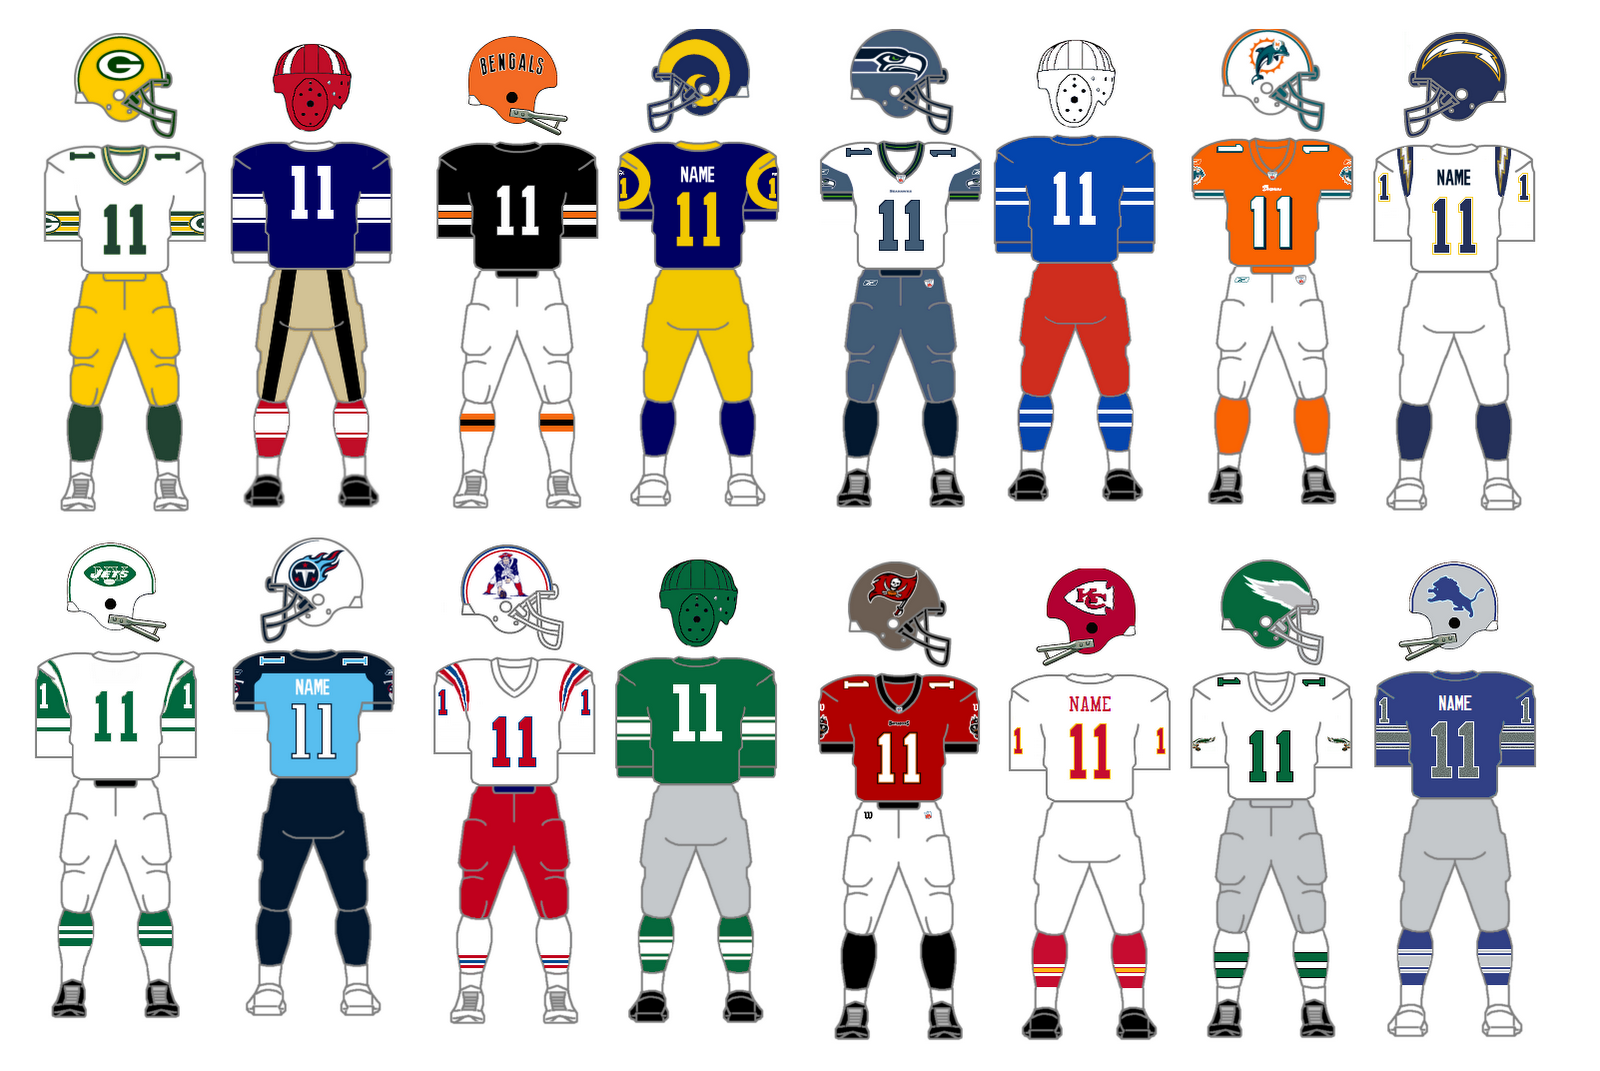 ... it is time to bring you another group of uniform matchups to vote on